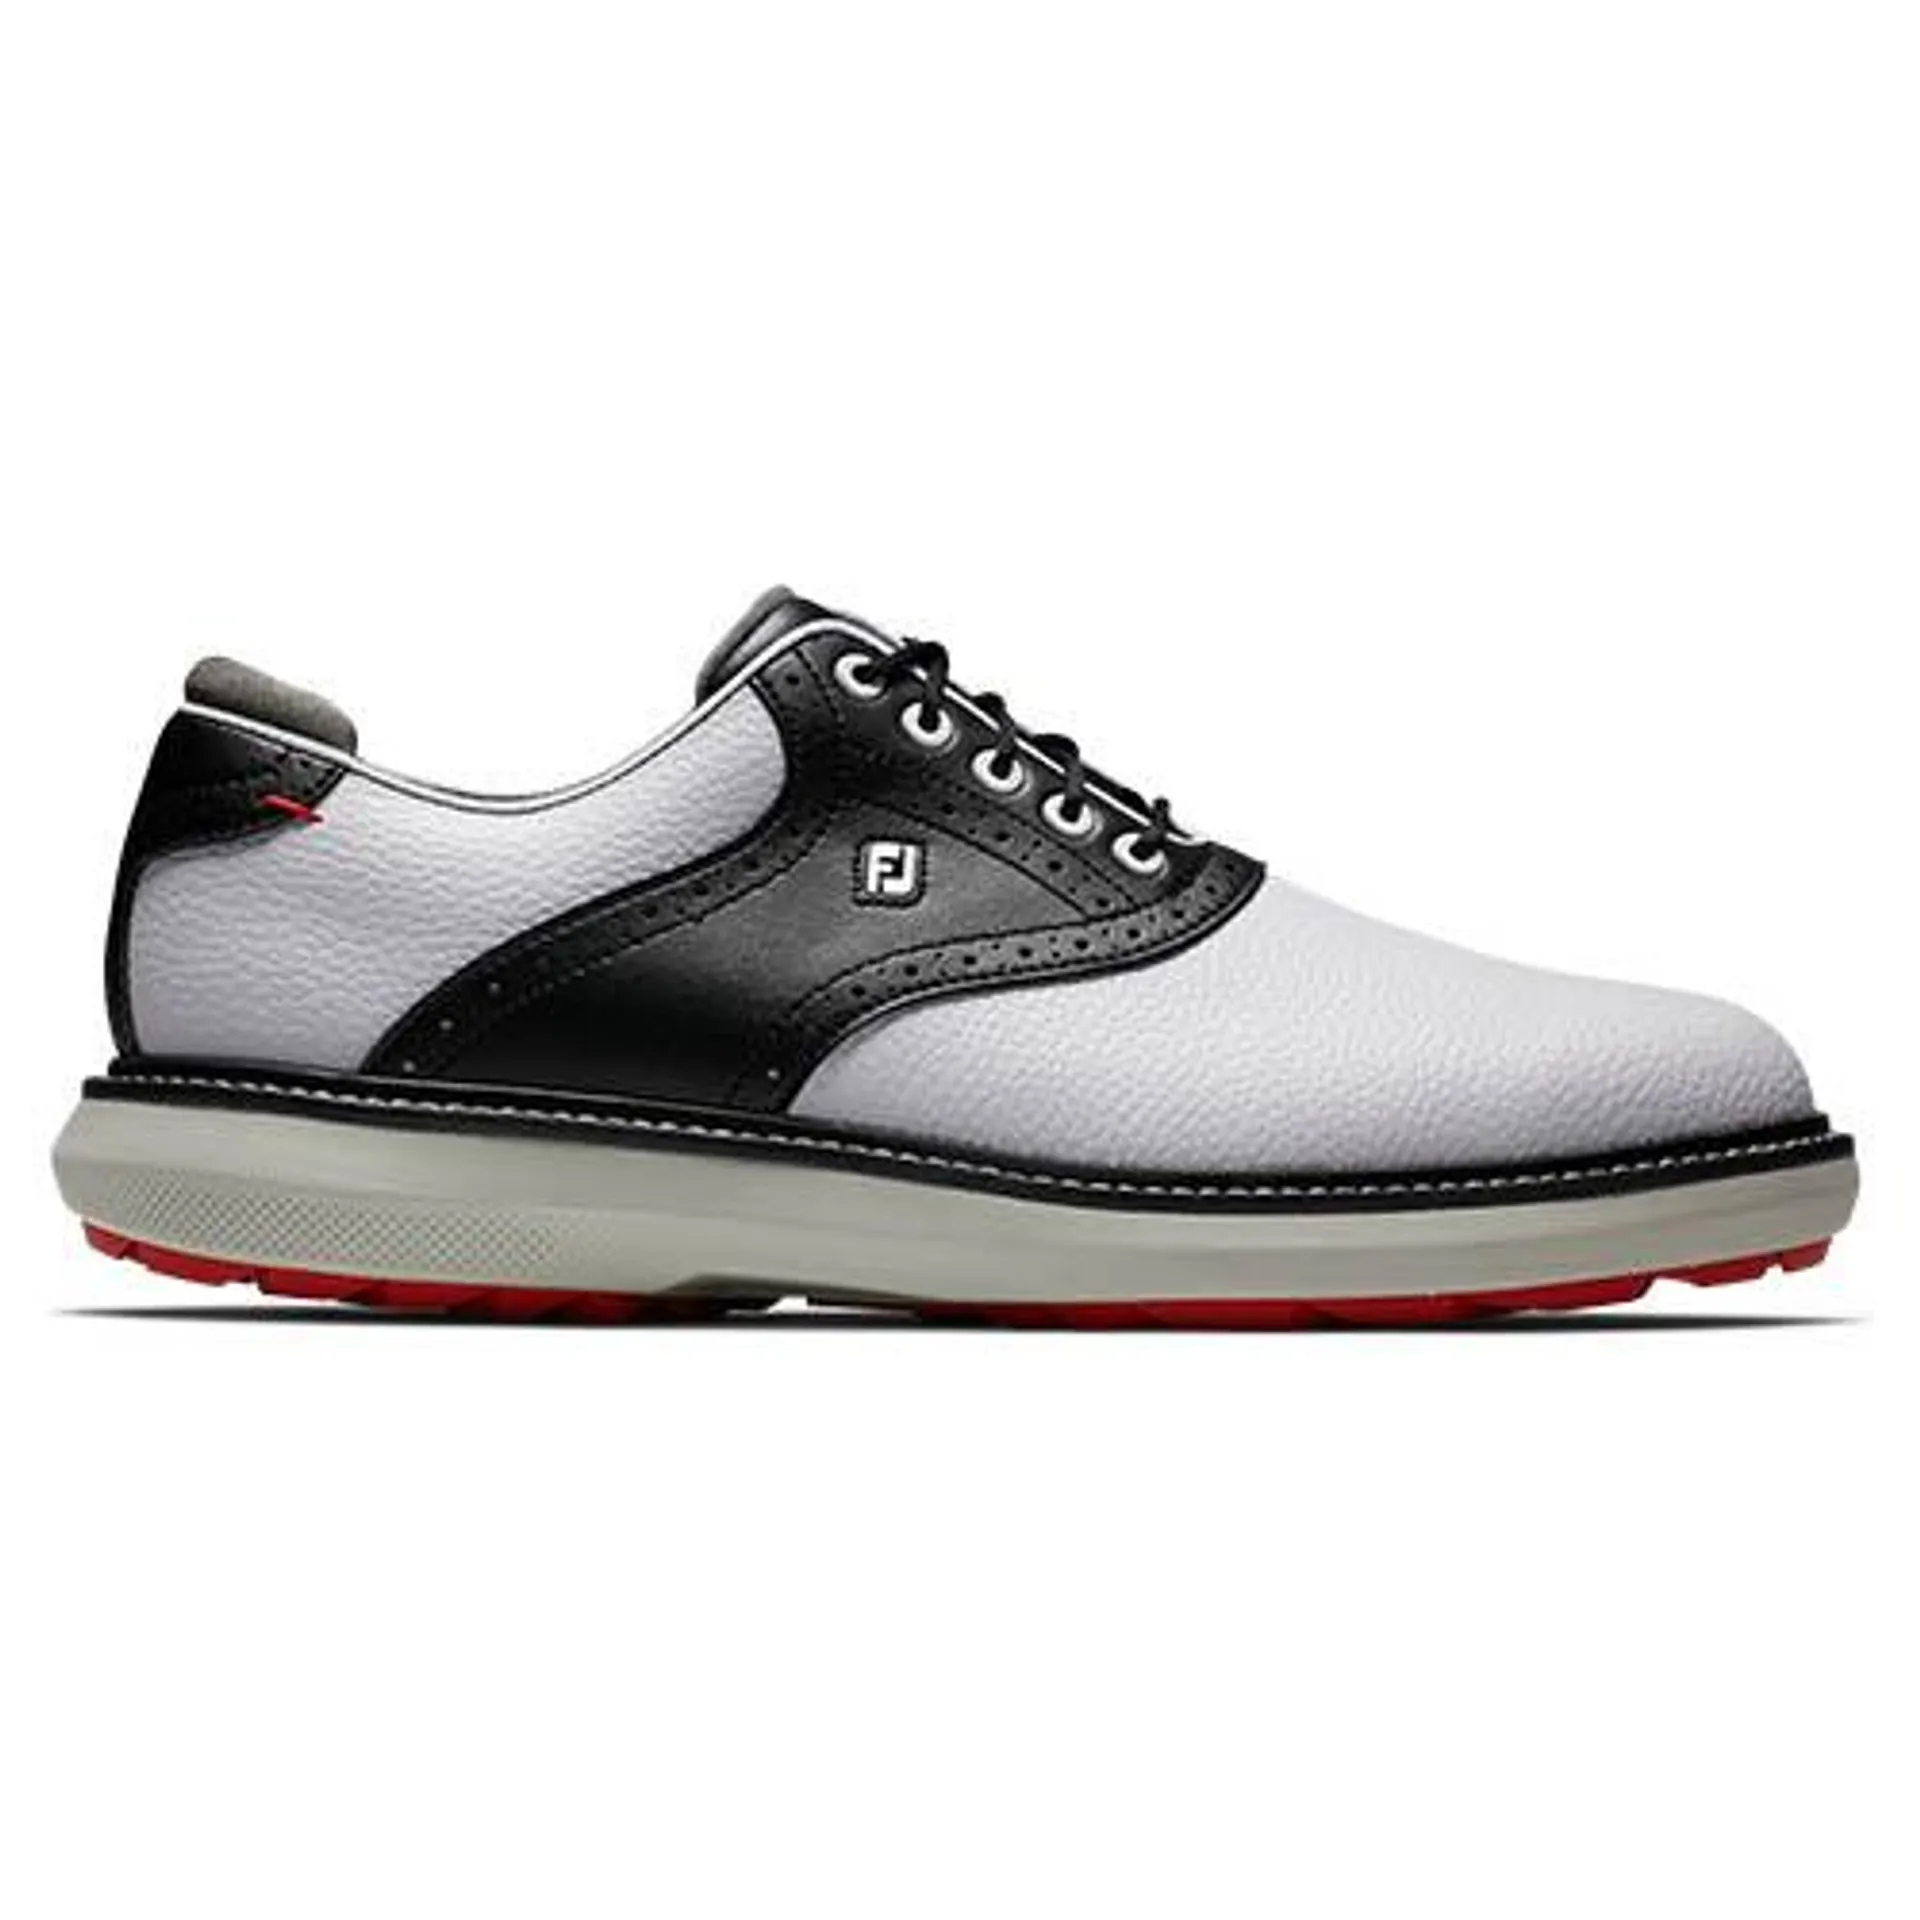 FootJoy Tradition Spikeless Golf Shoes – White/Black 57924